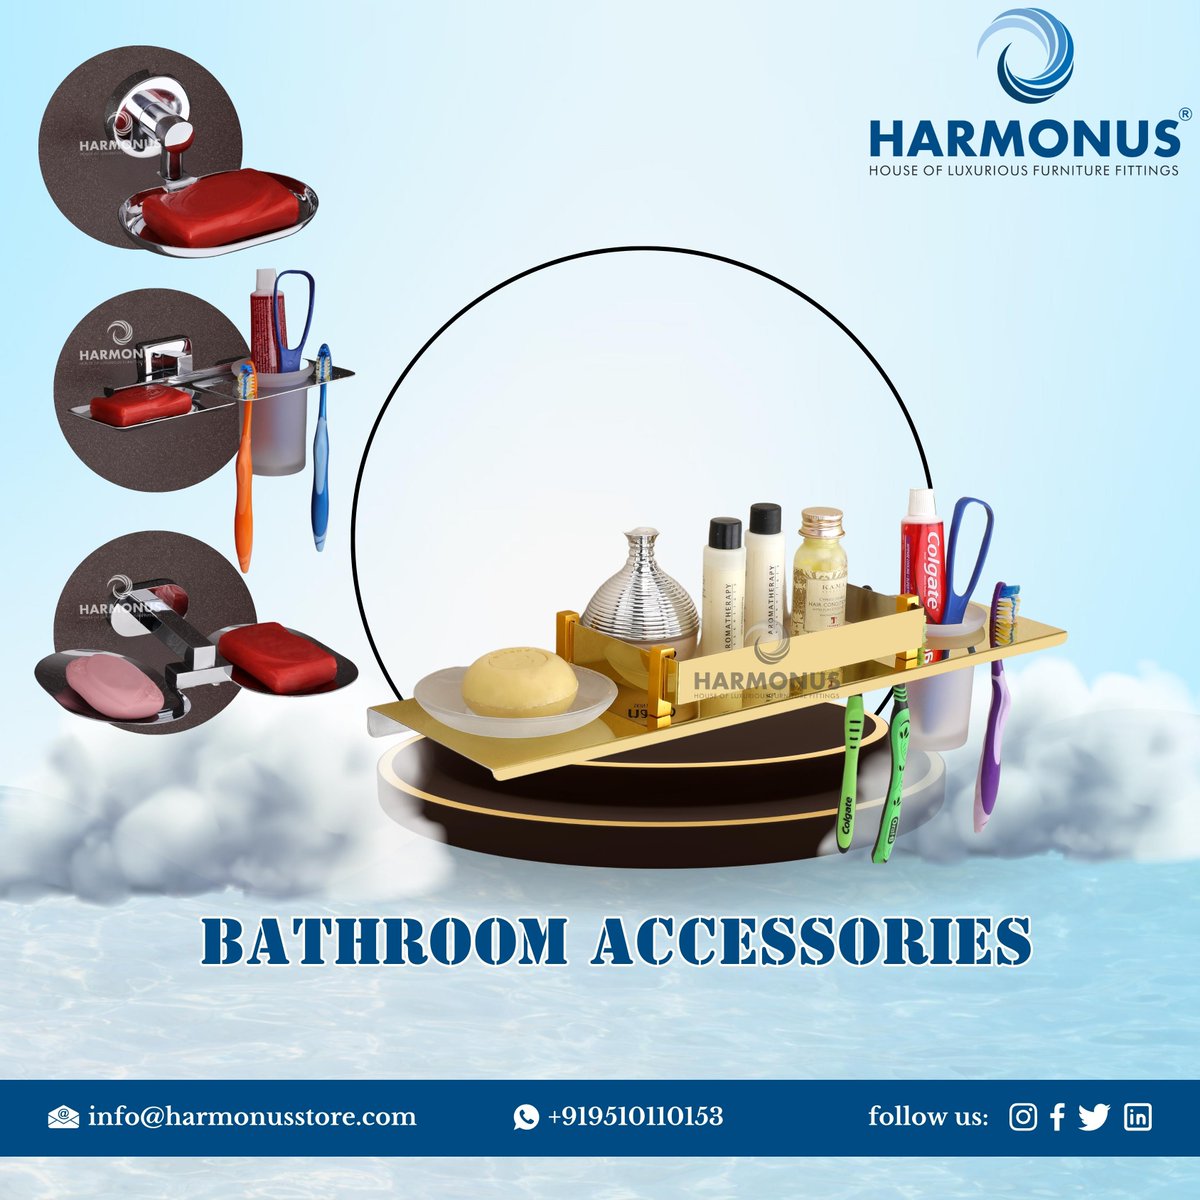 Revamp your bathroom with our stylish and functional bathroom accessories! From soap dispensers to towel racks, Harmonus Store has got you covered. 🚽💦
#HarmonusStore #bathroomaccessories #homedecor #renovation #interiordesign #soapdispenser  #bathroomstorage #bathroomrenovation